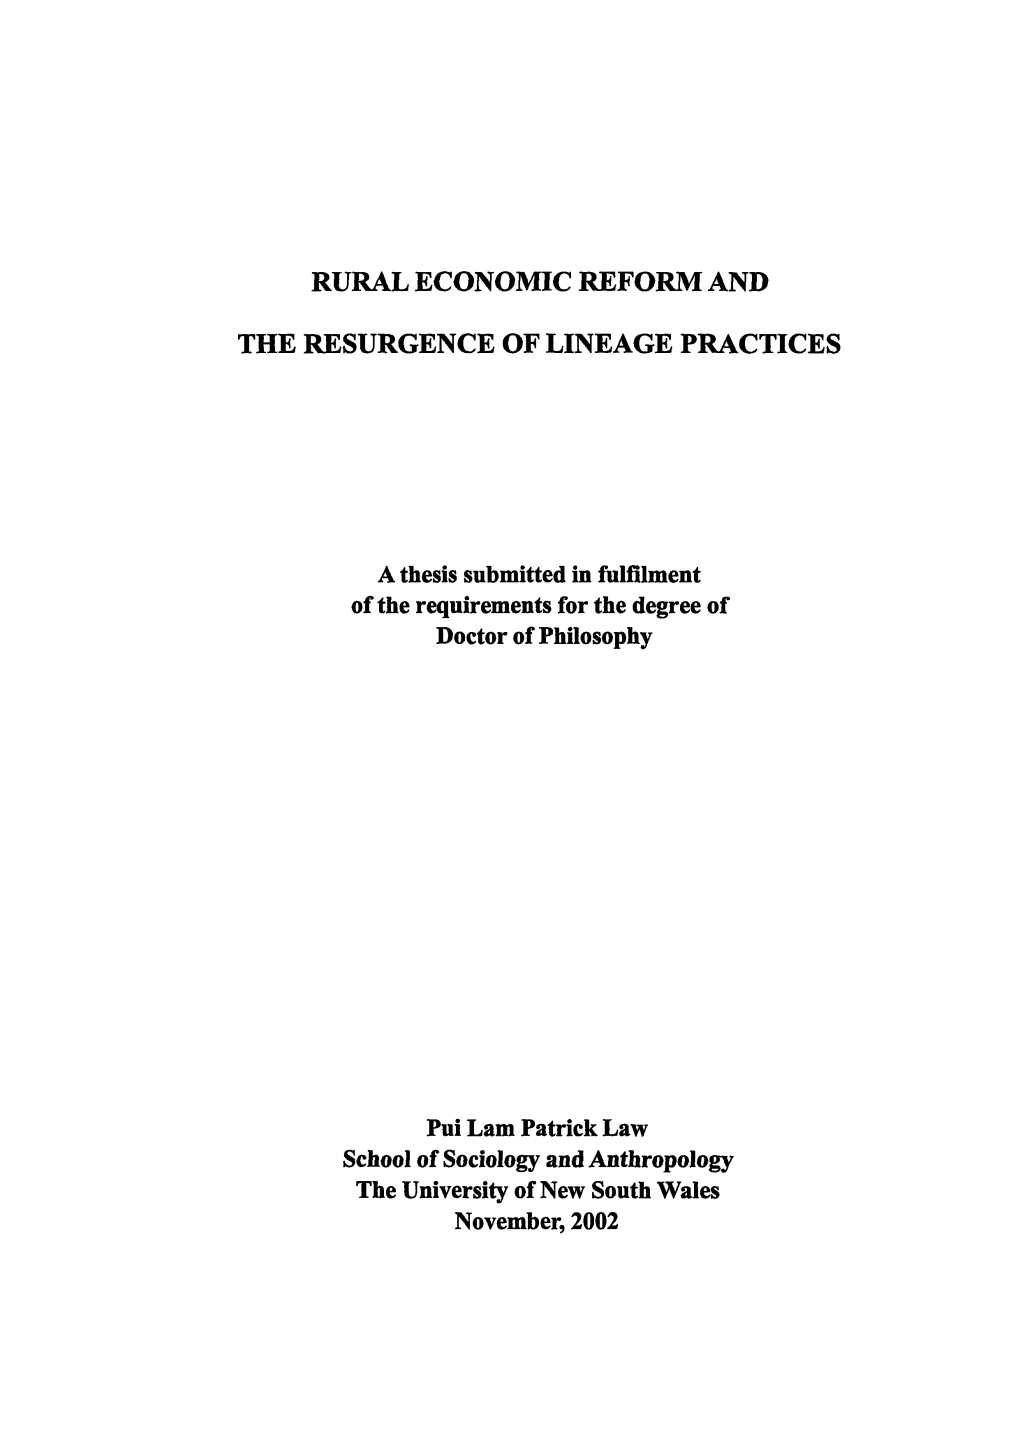 Rural Economic Reform and the Lo Lineage 246